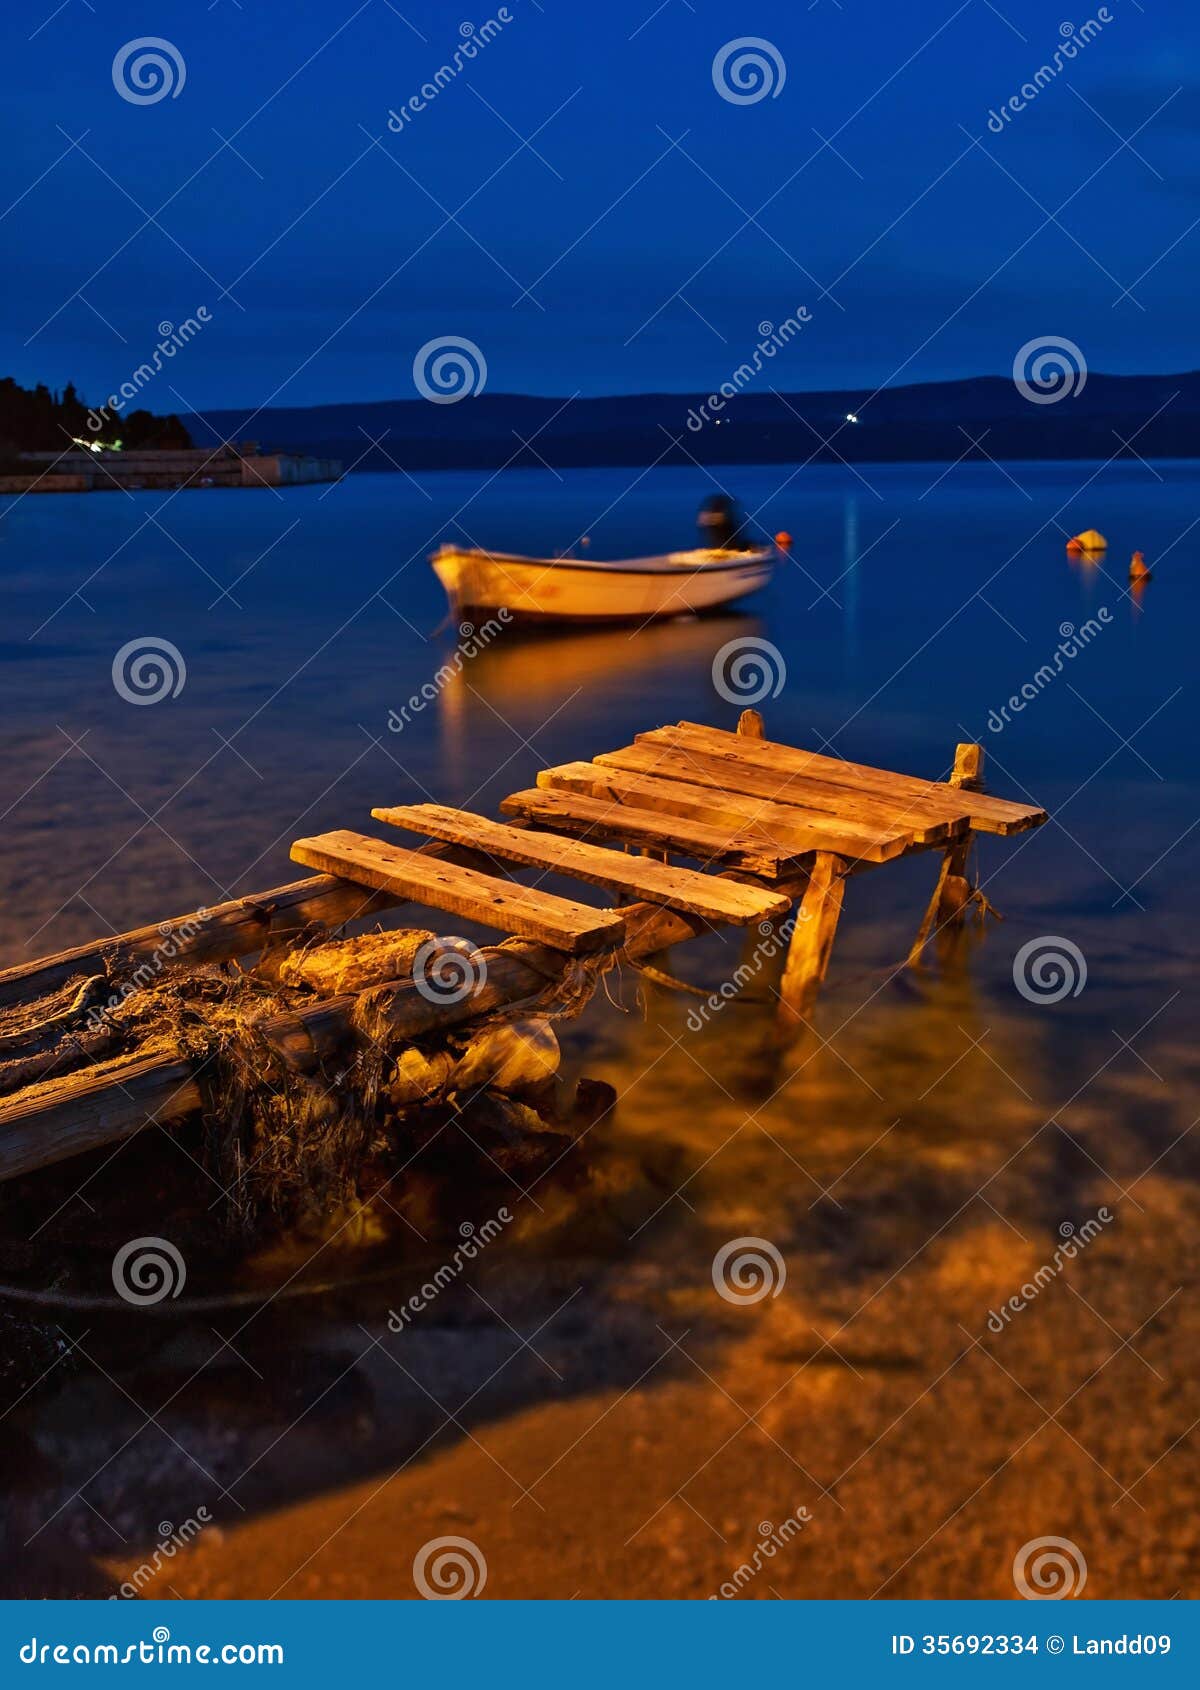 Wooden Dock And Boat At Night Stock Photo - Image of lake ...